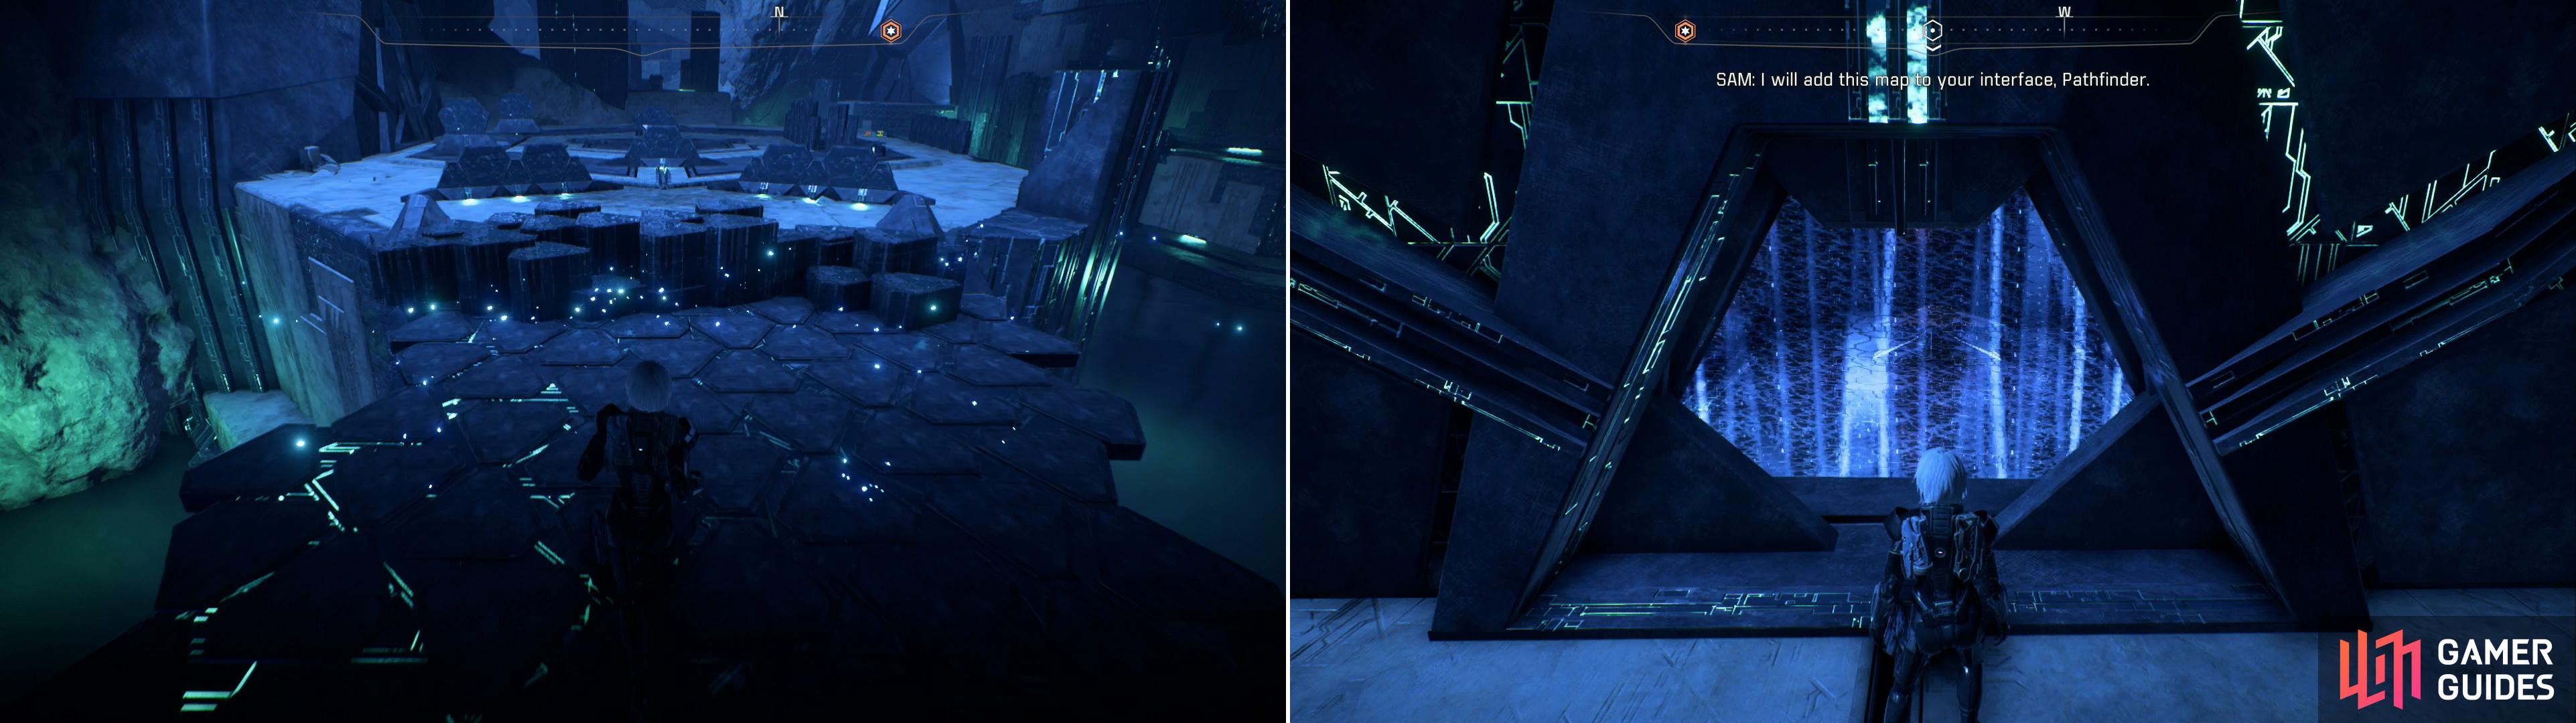 Don’t activate the Remnant Console at the entrance to the vault proper, which will allow you to cross a Remnant bridge (left). Note the chamber behind the energy barrier, which is worth planning to return to as you flee the vault (right).